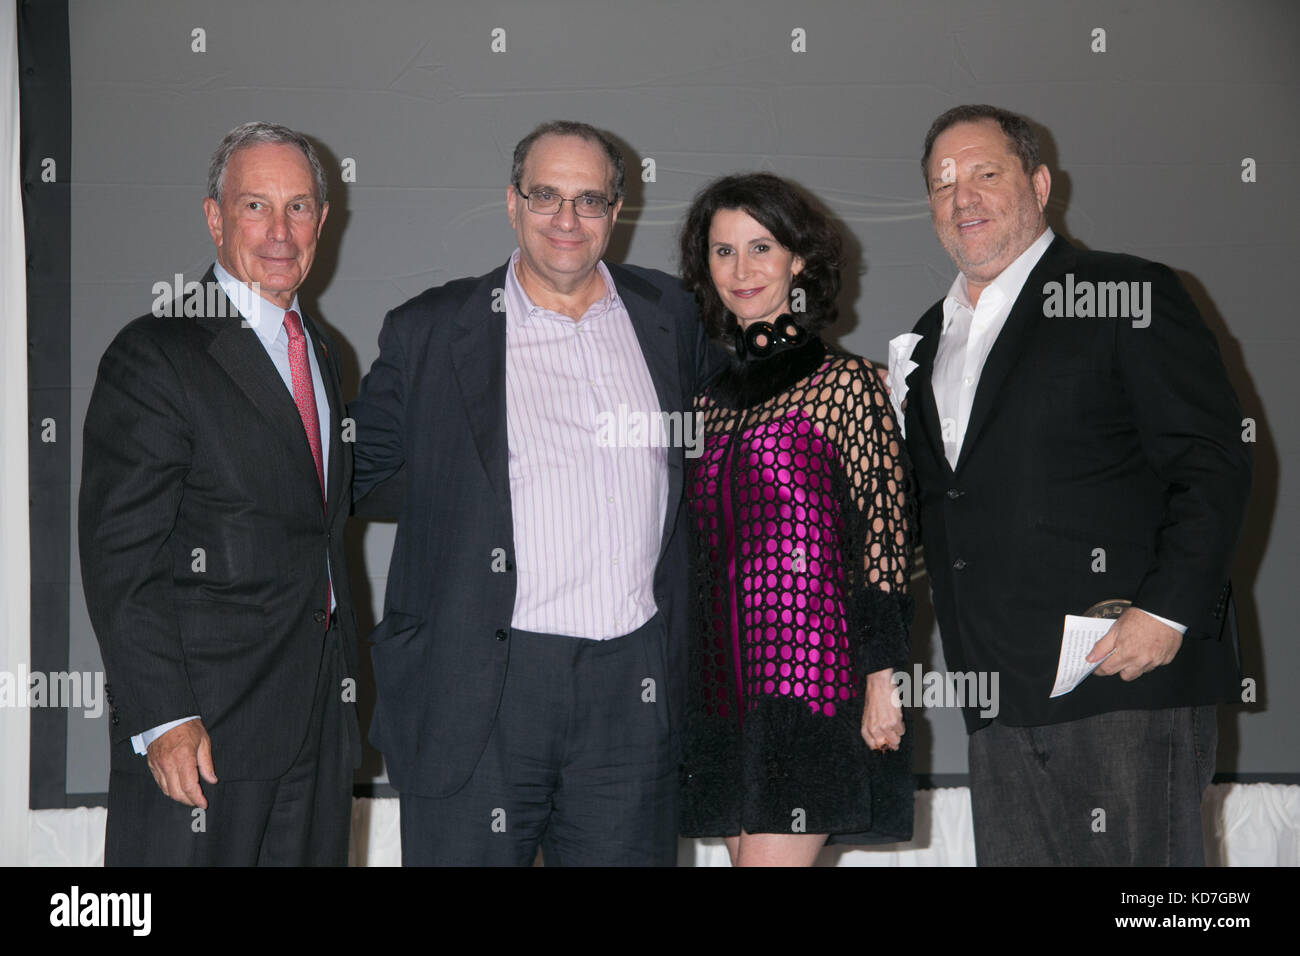 (L-R) New York Mayor Michael Bloomberg, film executive Bob Weinstein, New York City Film Commissioner Katherine Oliver and film executive Harvey Weinstein onstage as a 'Made In NY Award' is presented to film executives Bob Weinstein and Harvey Weinstein at the 8th Annual 'Made In NY Awards' at Gracie Mansion on June 10, 2013 in New York City. Stock Photo